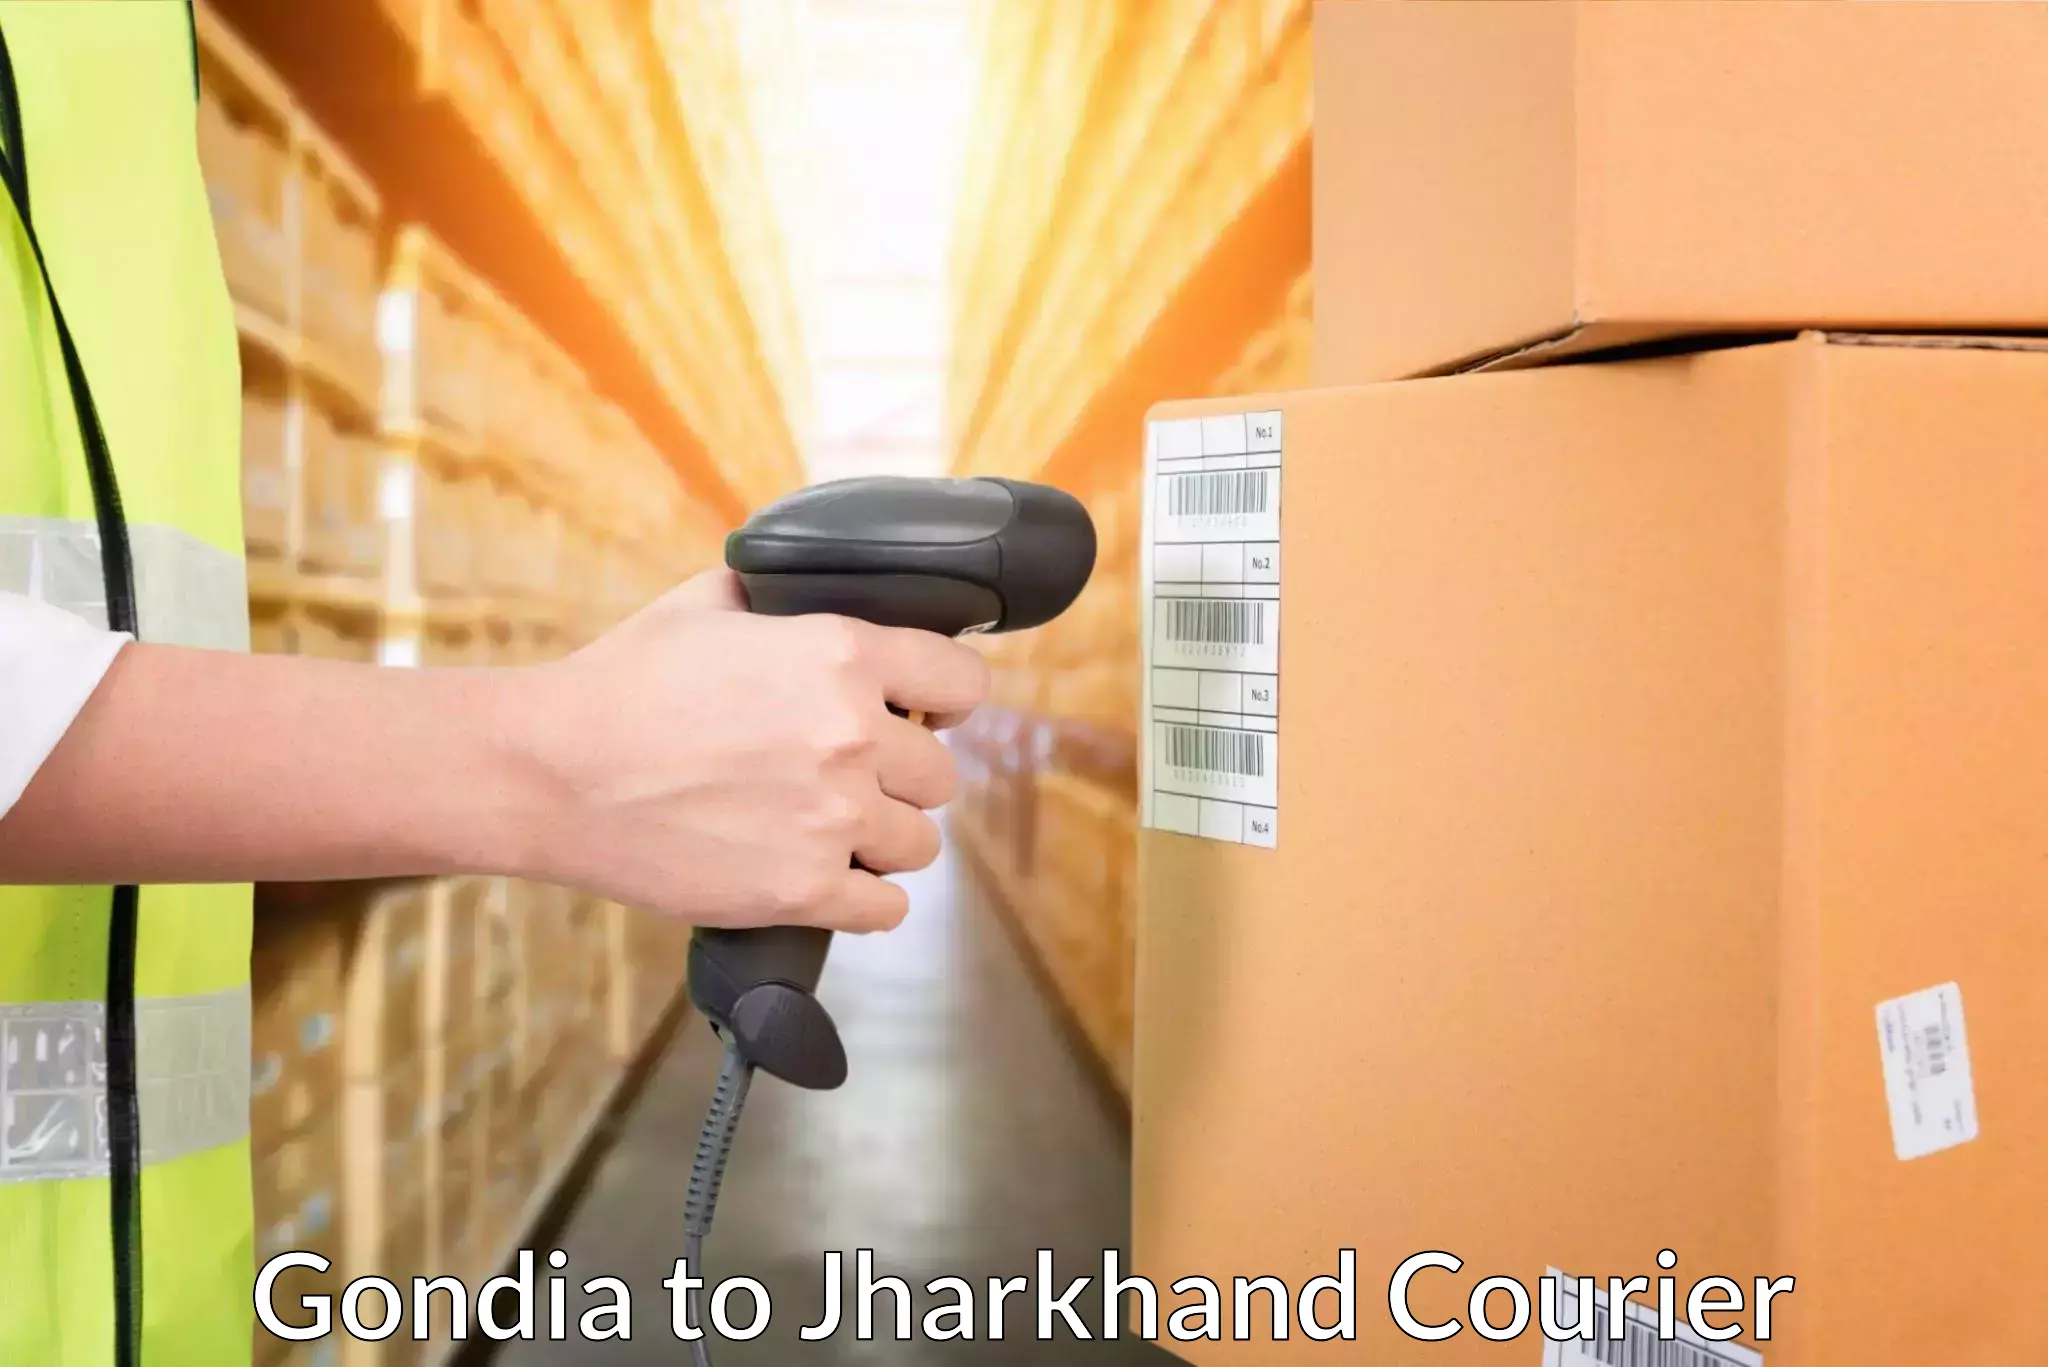 Flexible delivery scheduling Gondia to Chandwa